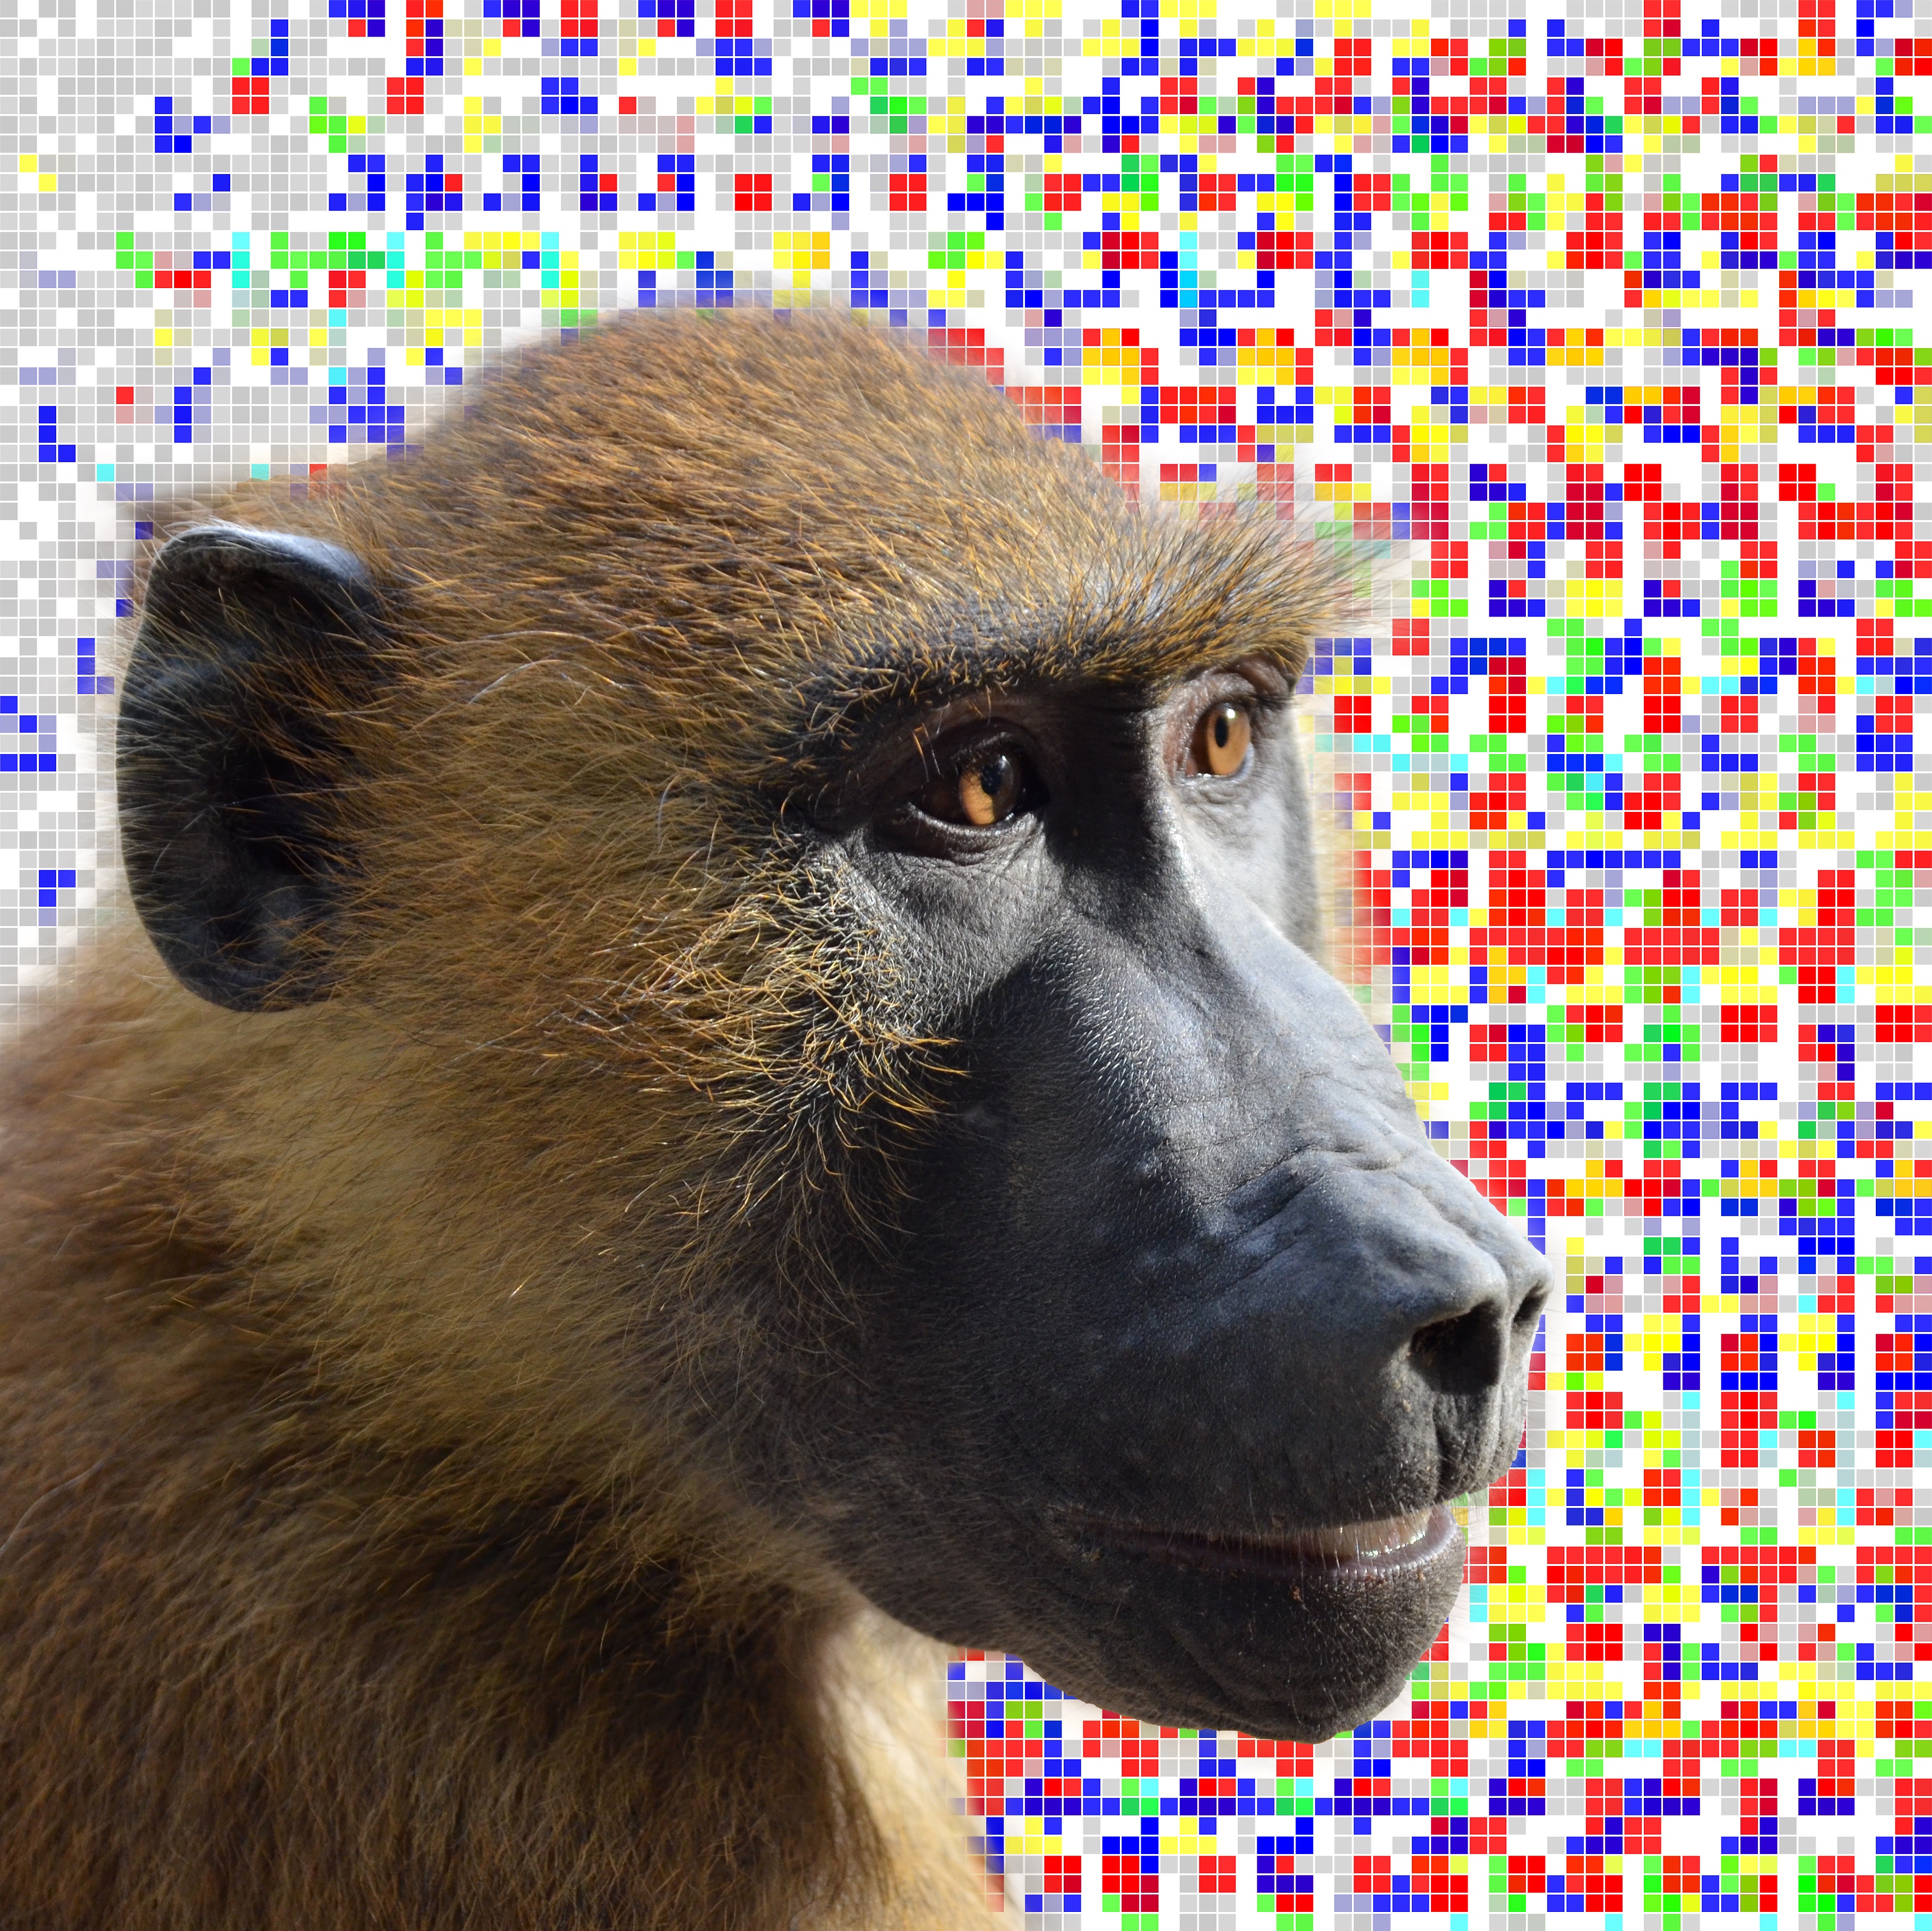 Results from the experiment with picture of baboon